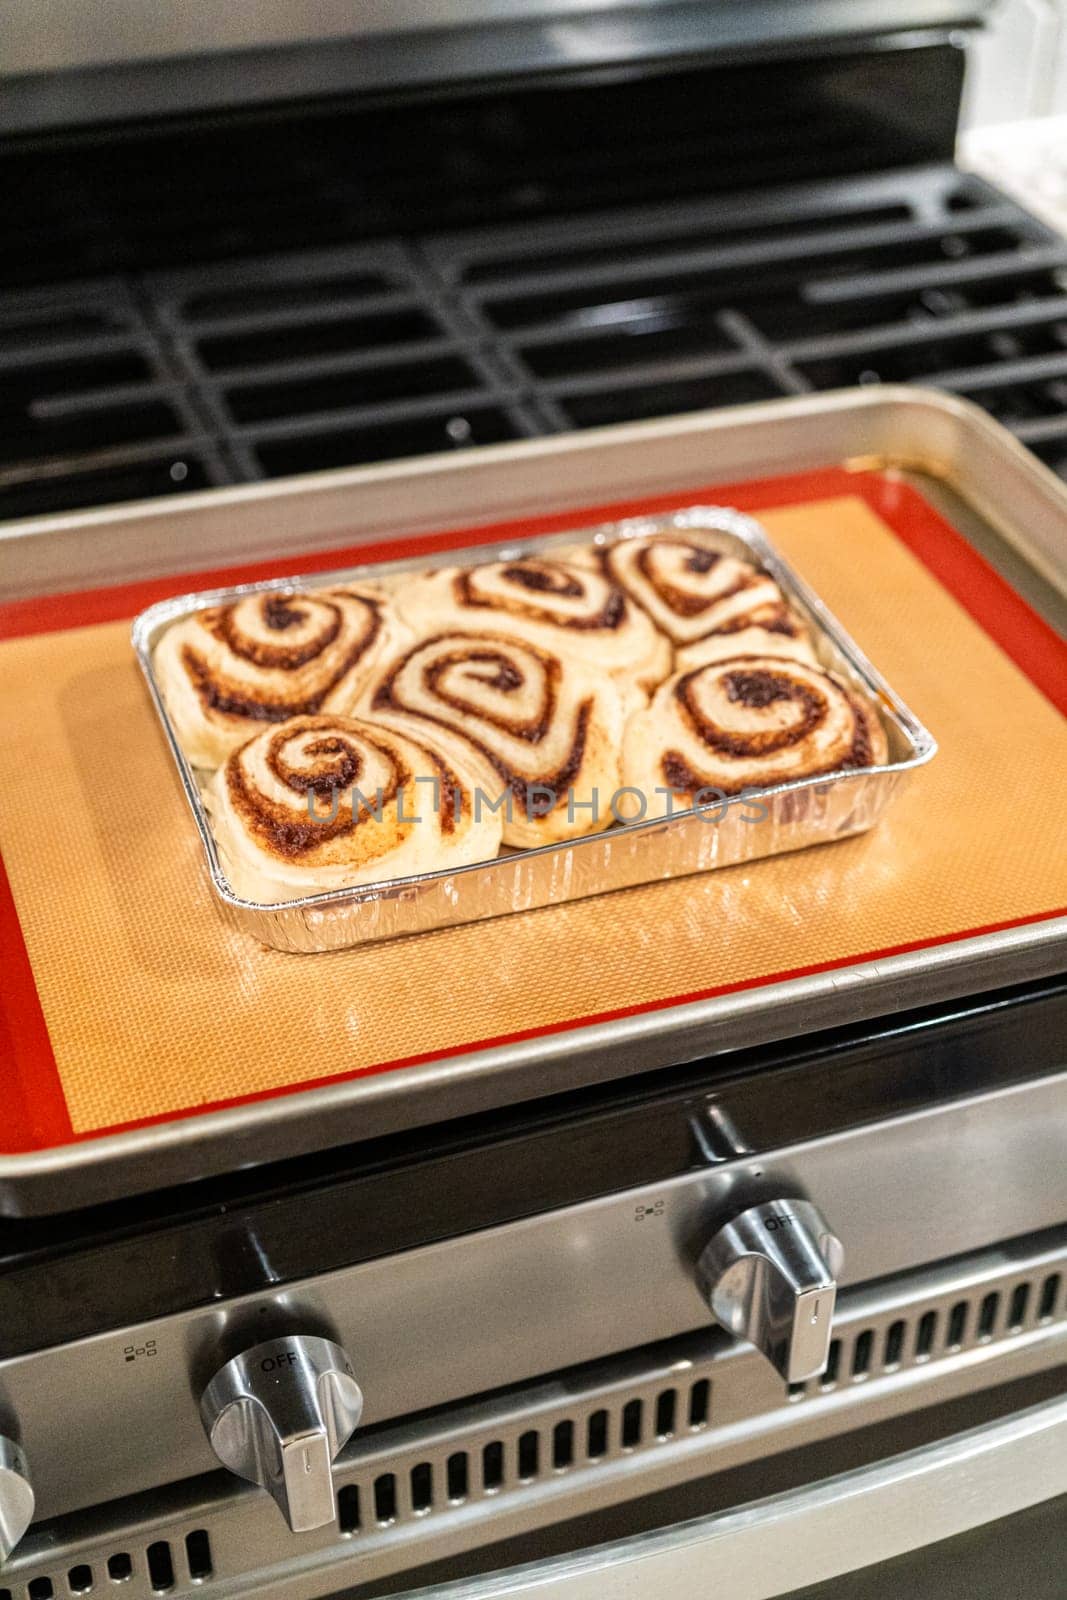 Just out of the oven, cinnamon rolls cool on a silicone baking mat, their icing glistening under the kitchen lights.